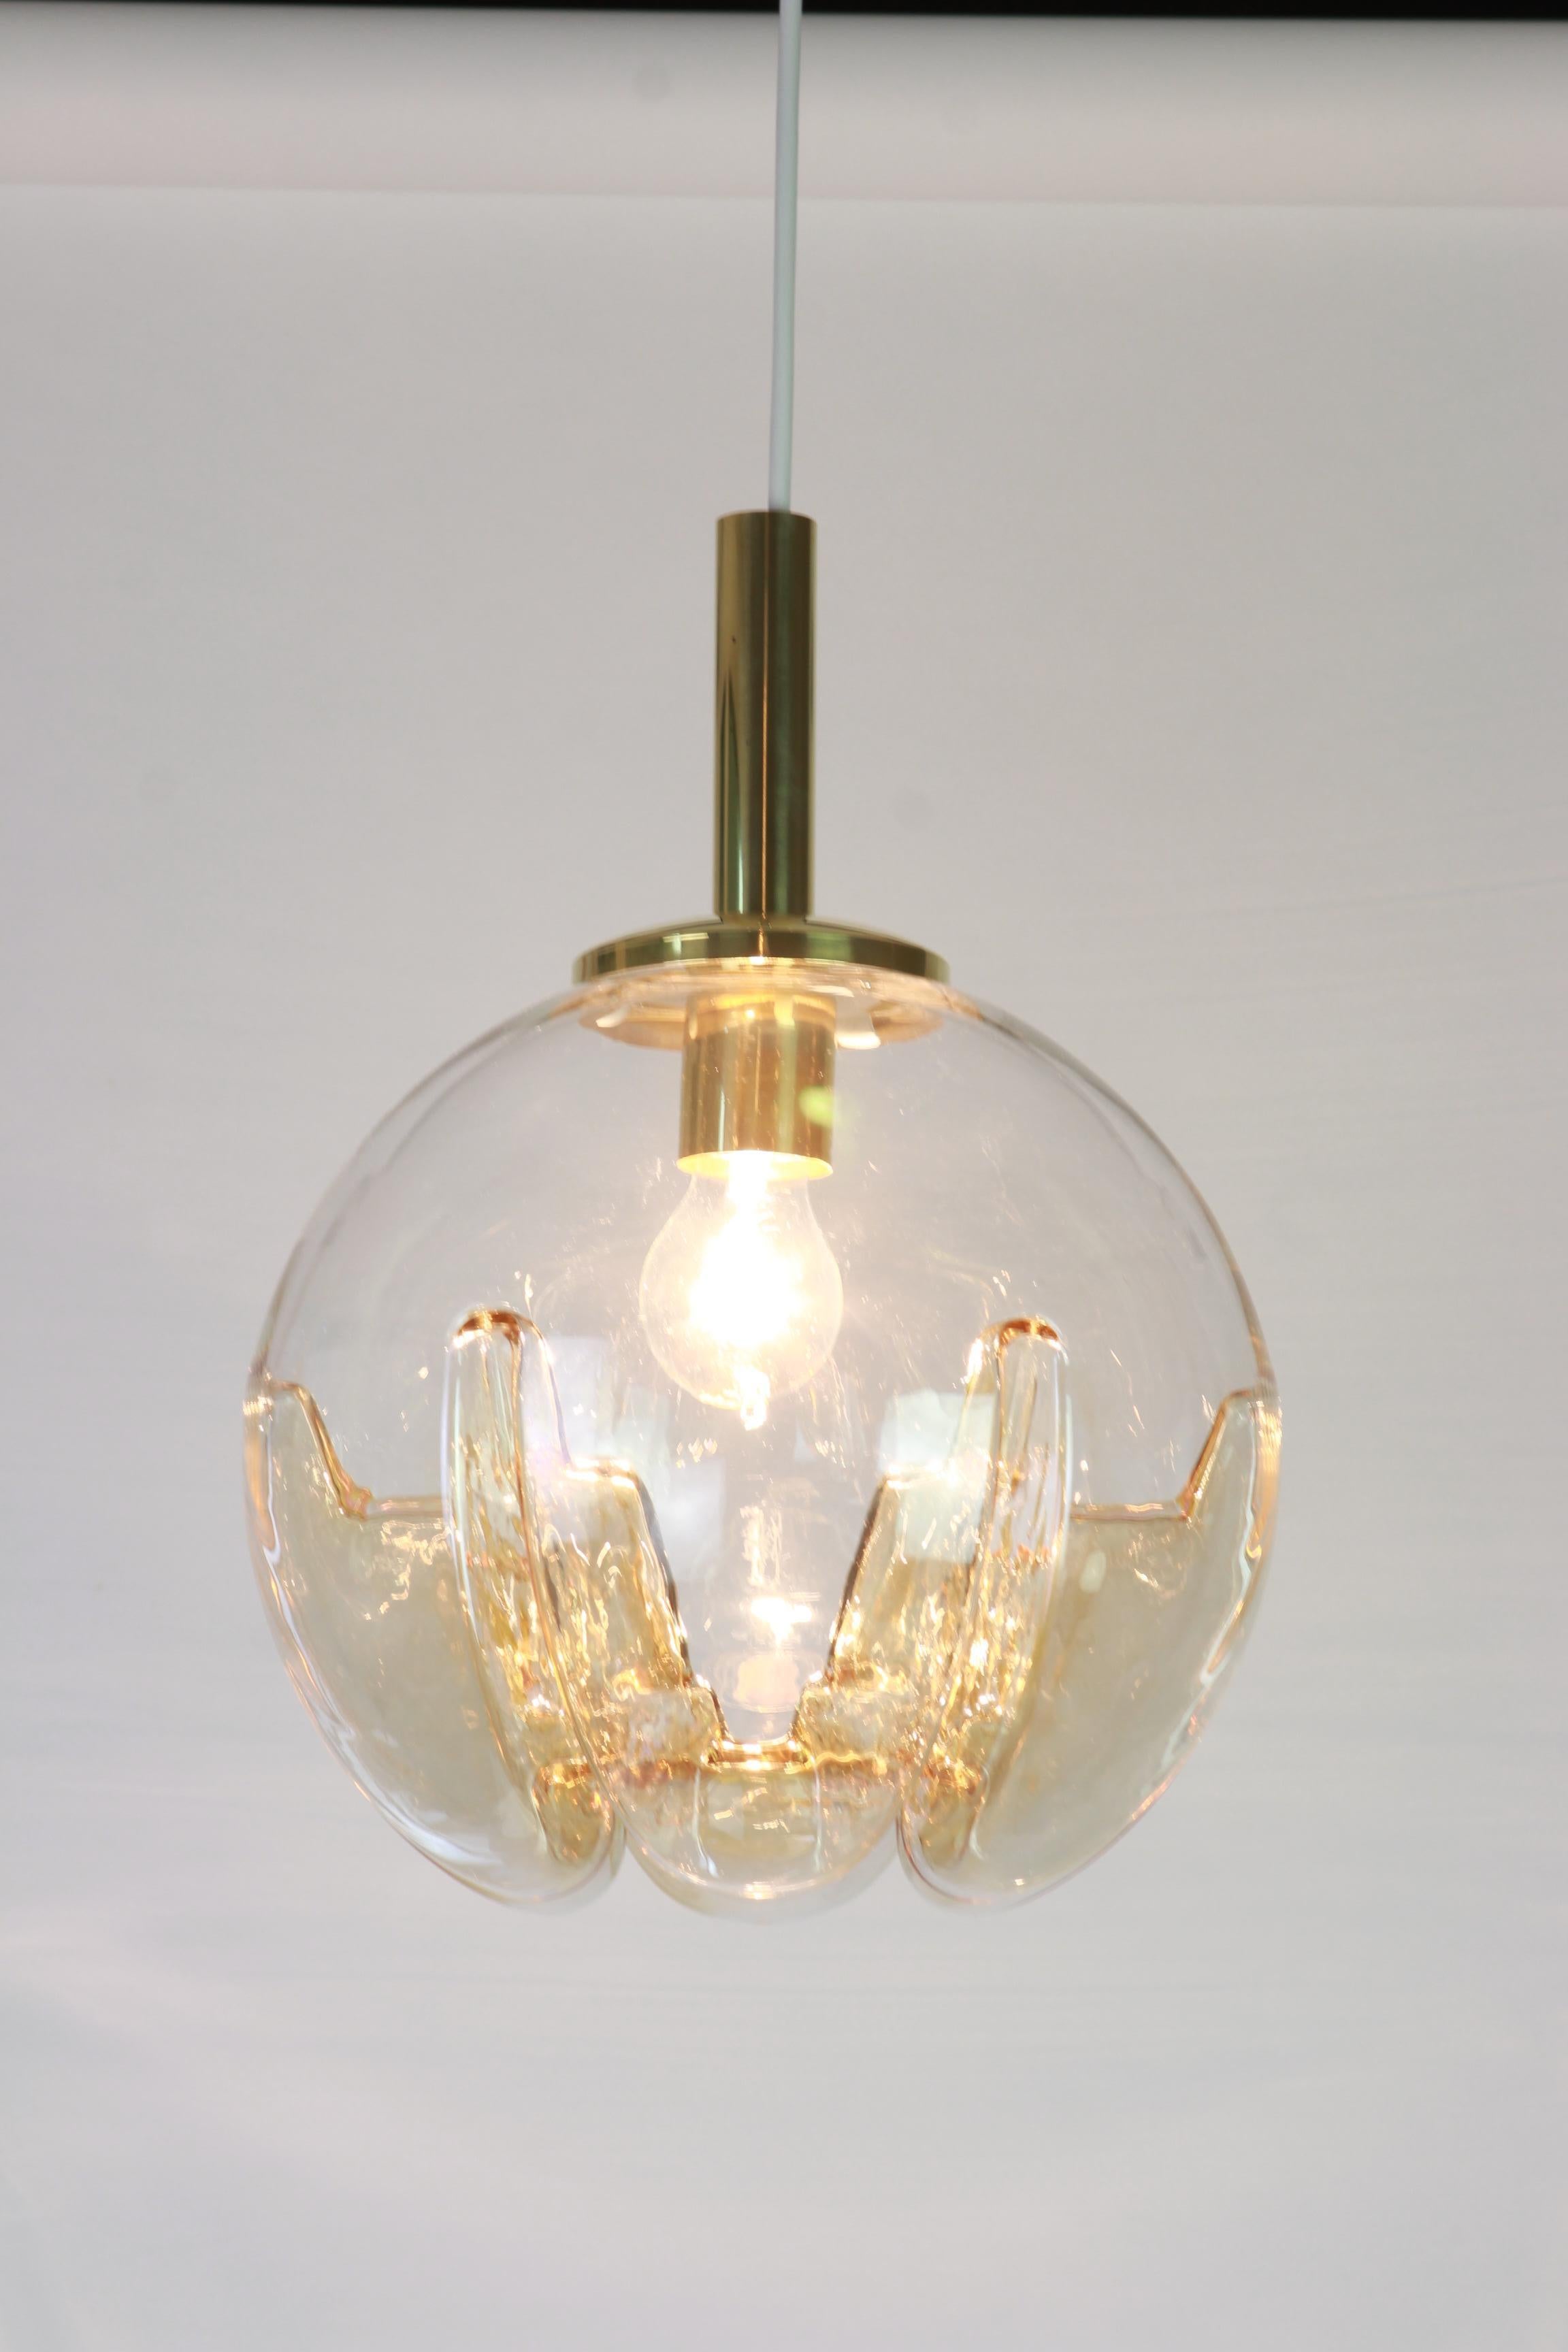 Mid-Century Modern 1 of 2 Murano Ball Pendant Light by Doria, Germany, 1970s For Sale